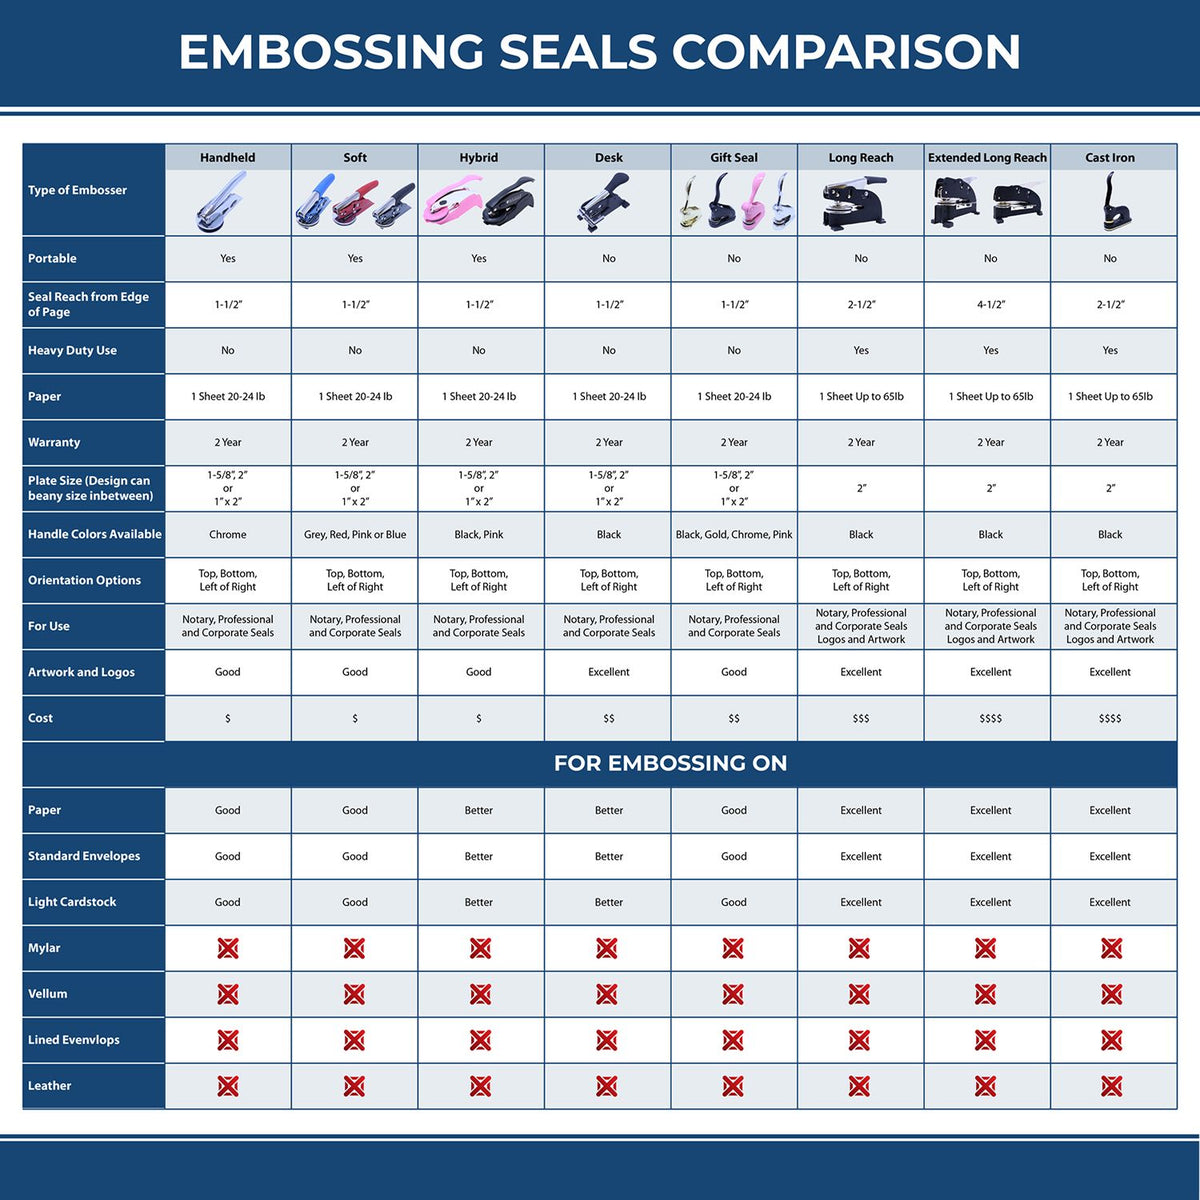 A comparison chart for the different types of mount models available for the Heavy Duty Cast Iron West Virginia Engineer Seal Embosser.